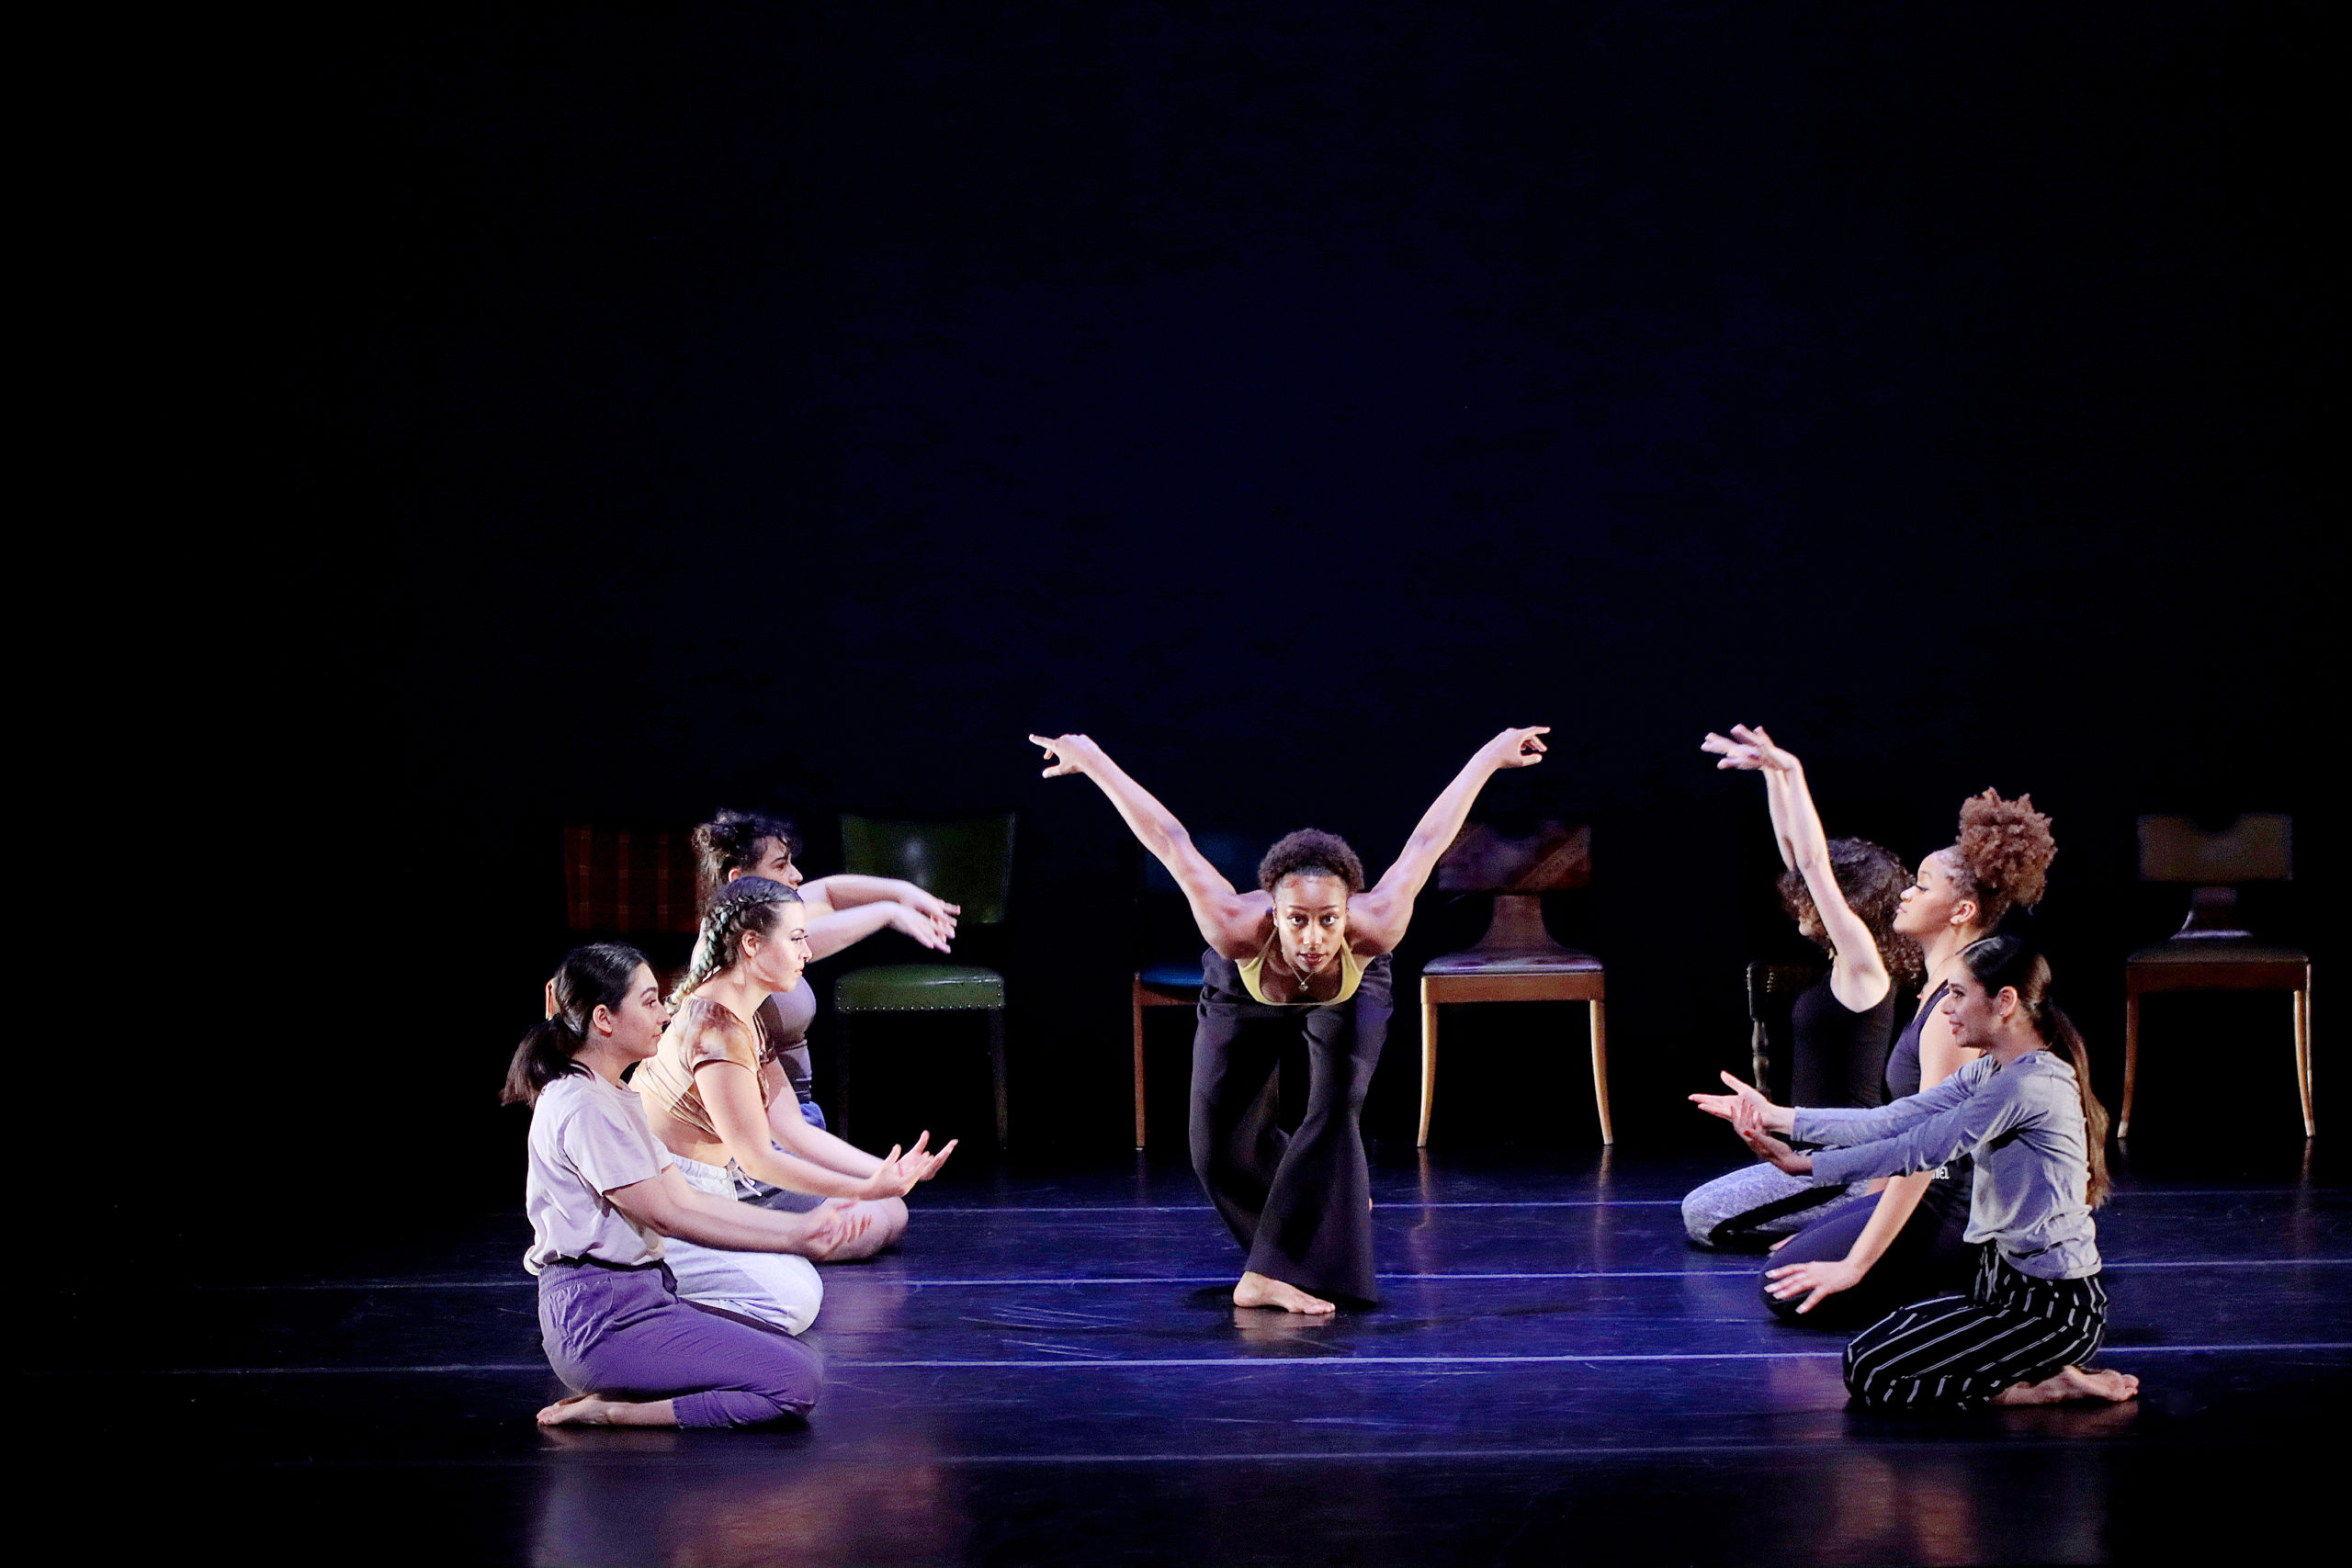 female dancer bowing forward in center with other dancers kneeling on either side of her